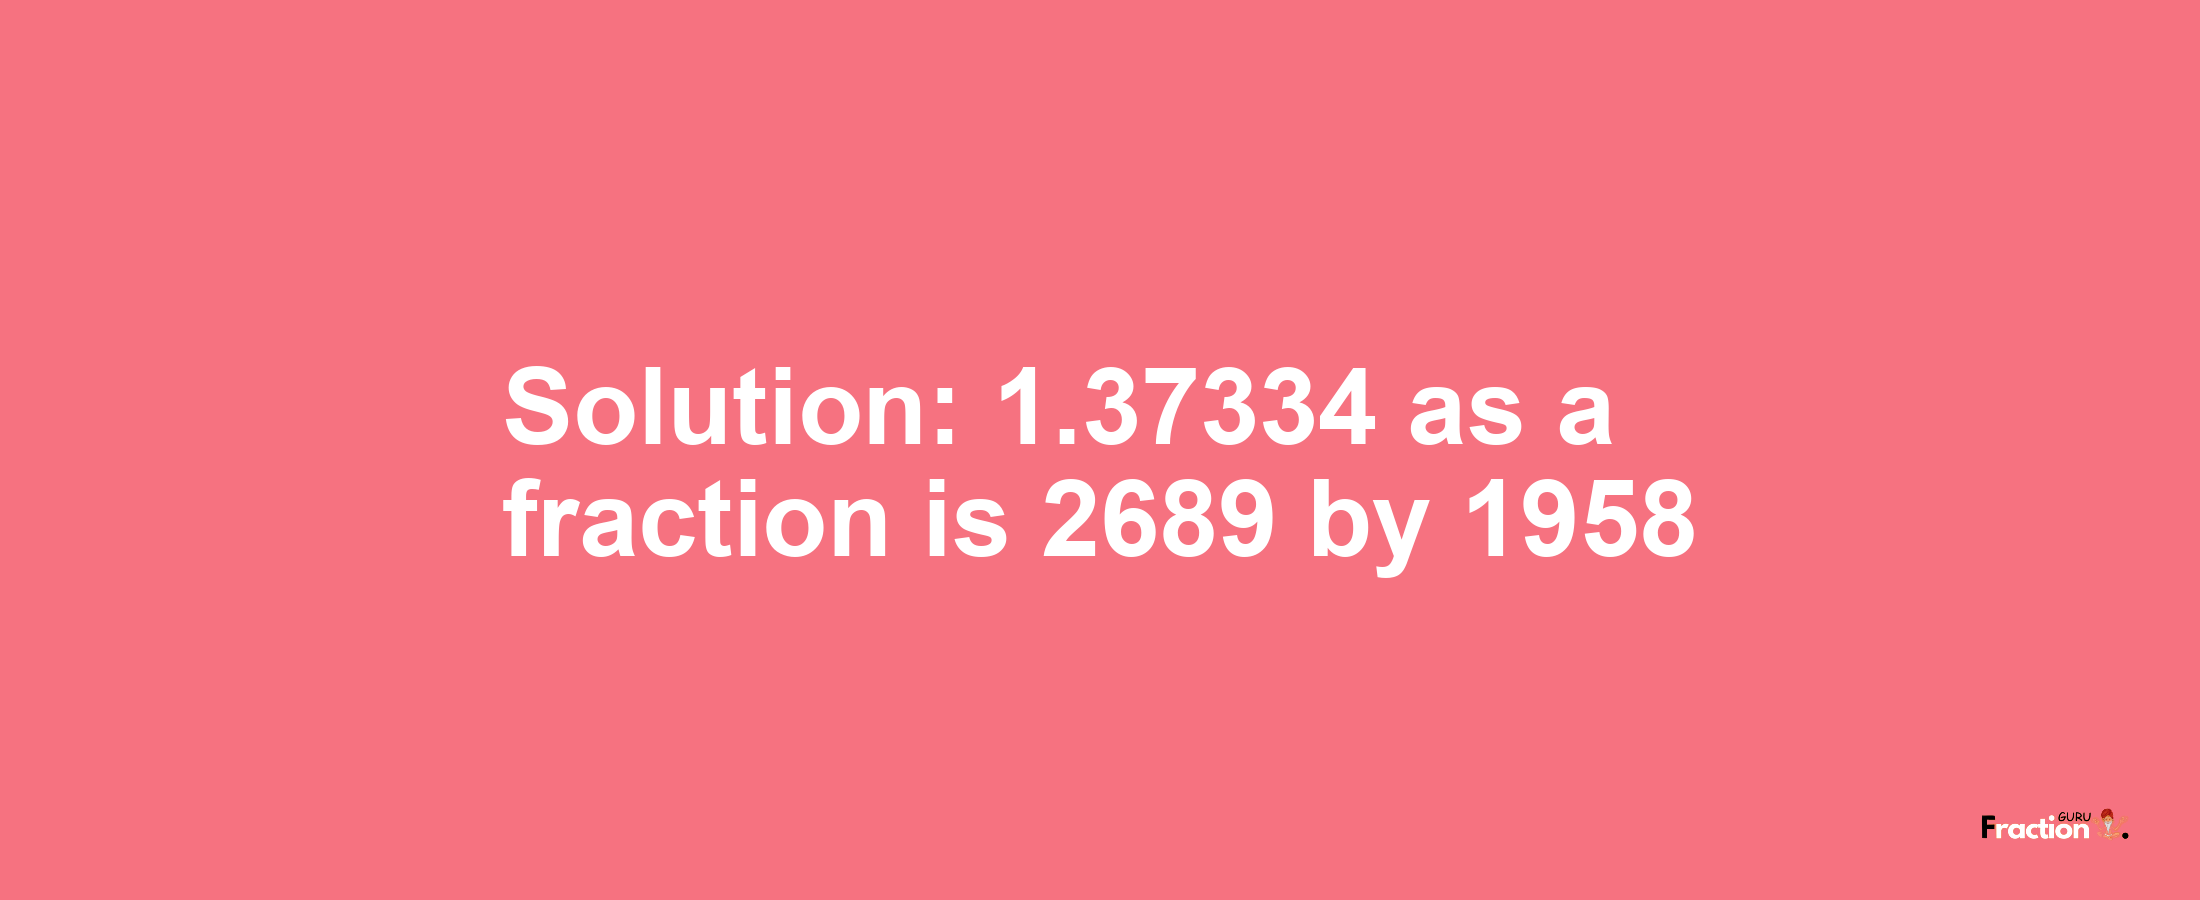 Solution:1.37334 as a fraction is 2689/1958